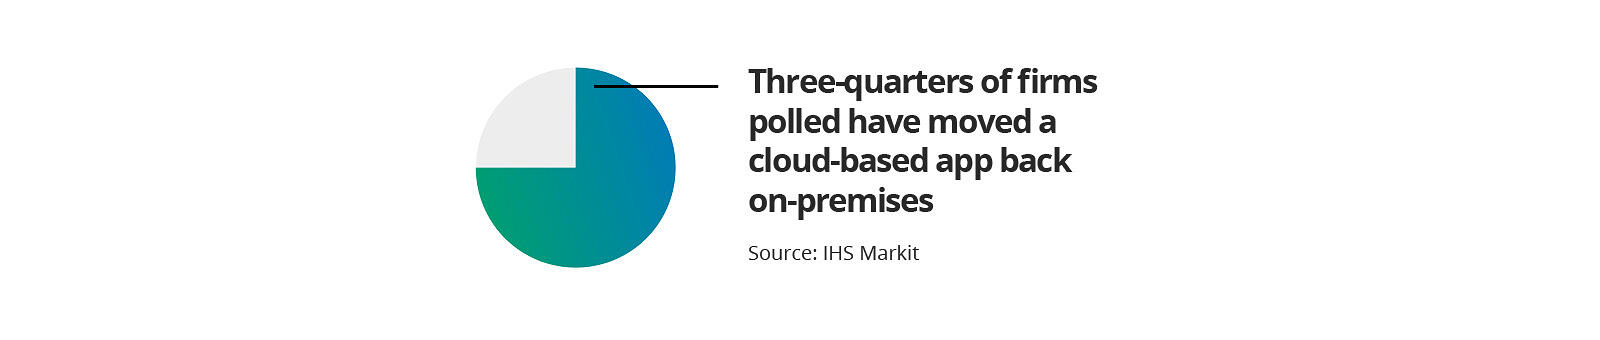 Three-quarters of firms have moved cloud apps back on prem